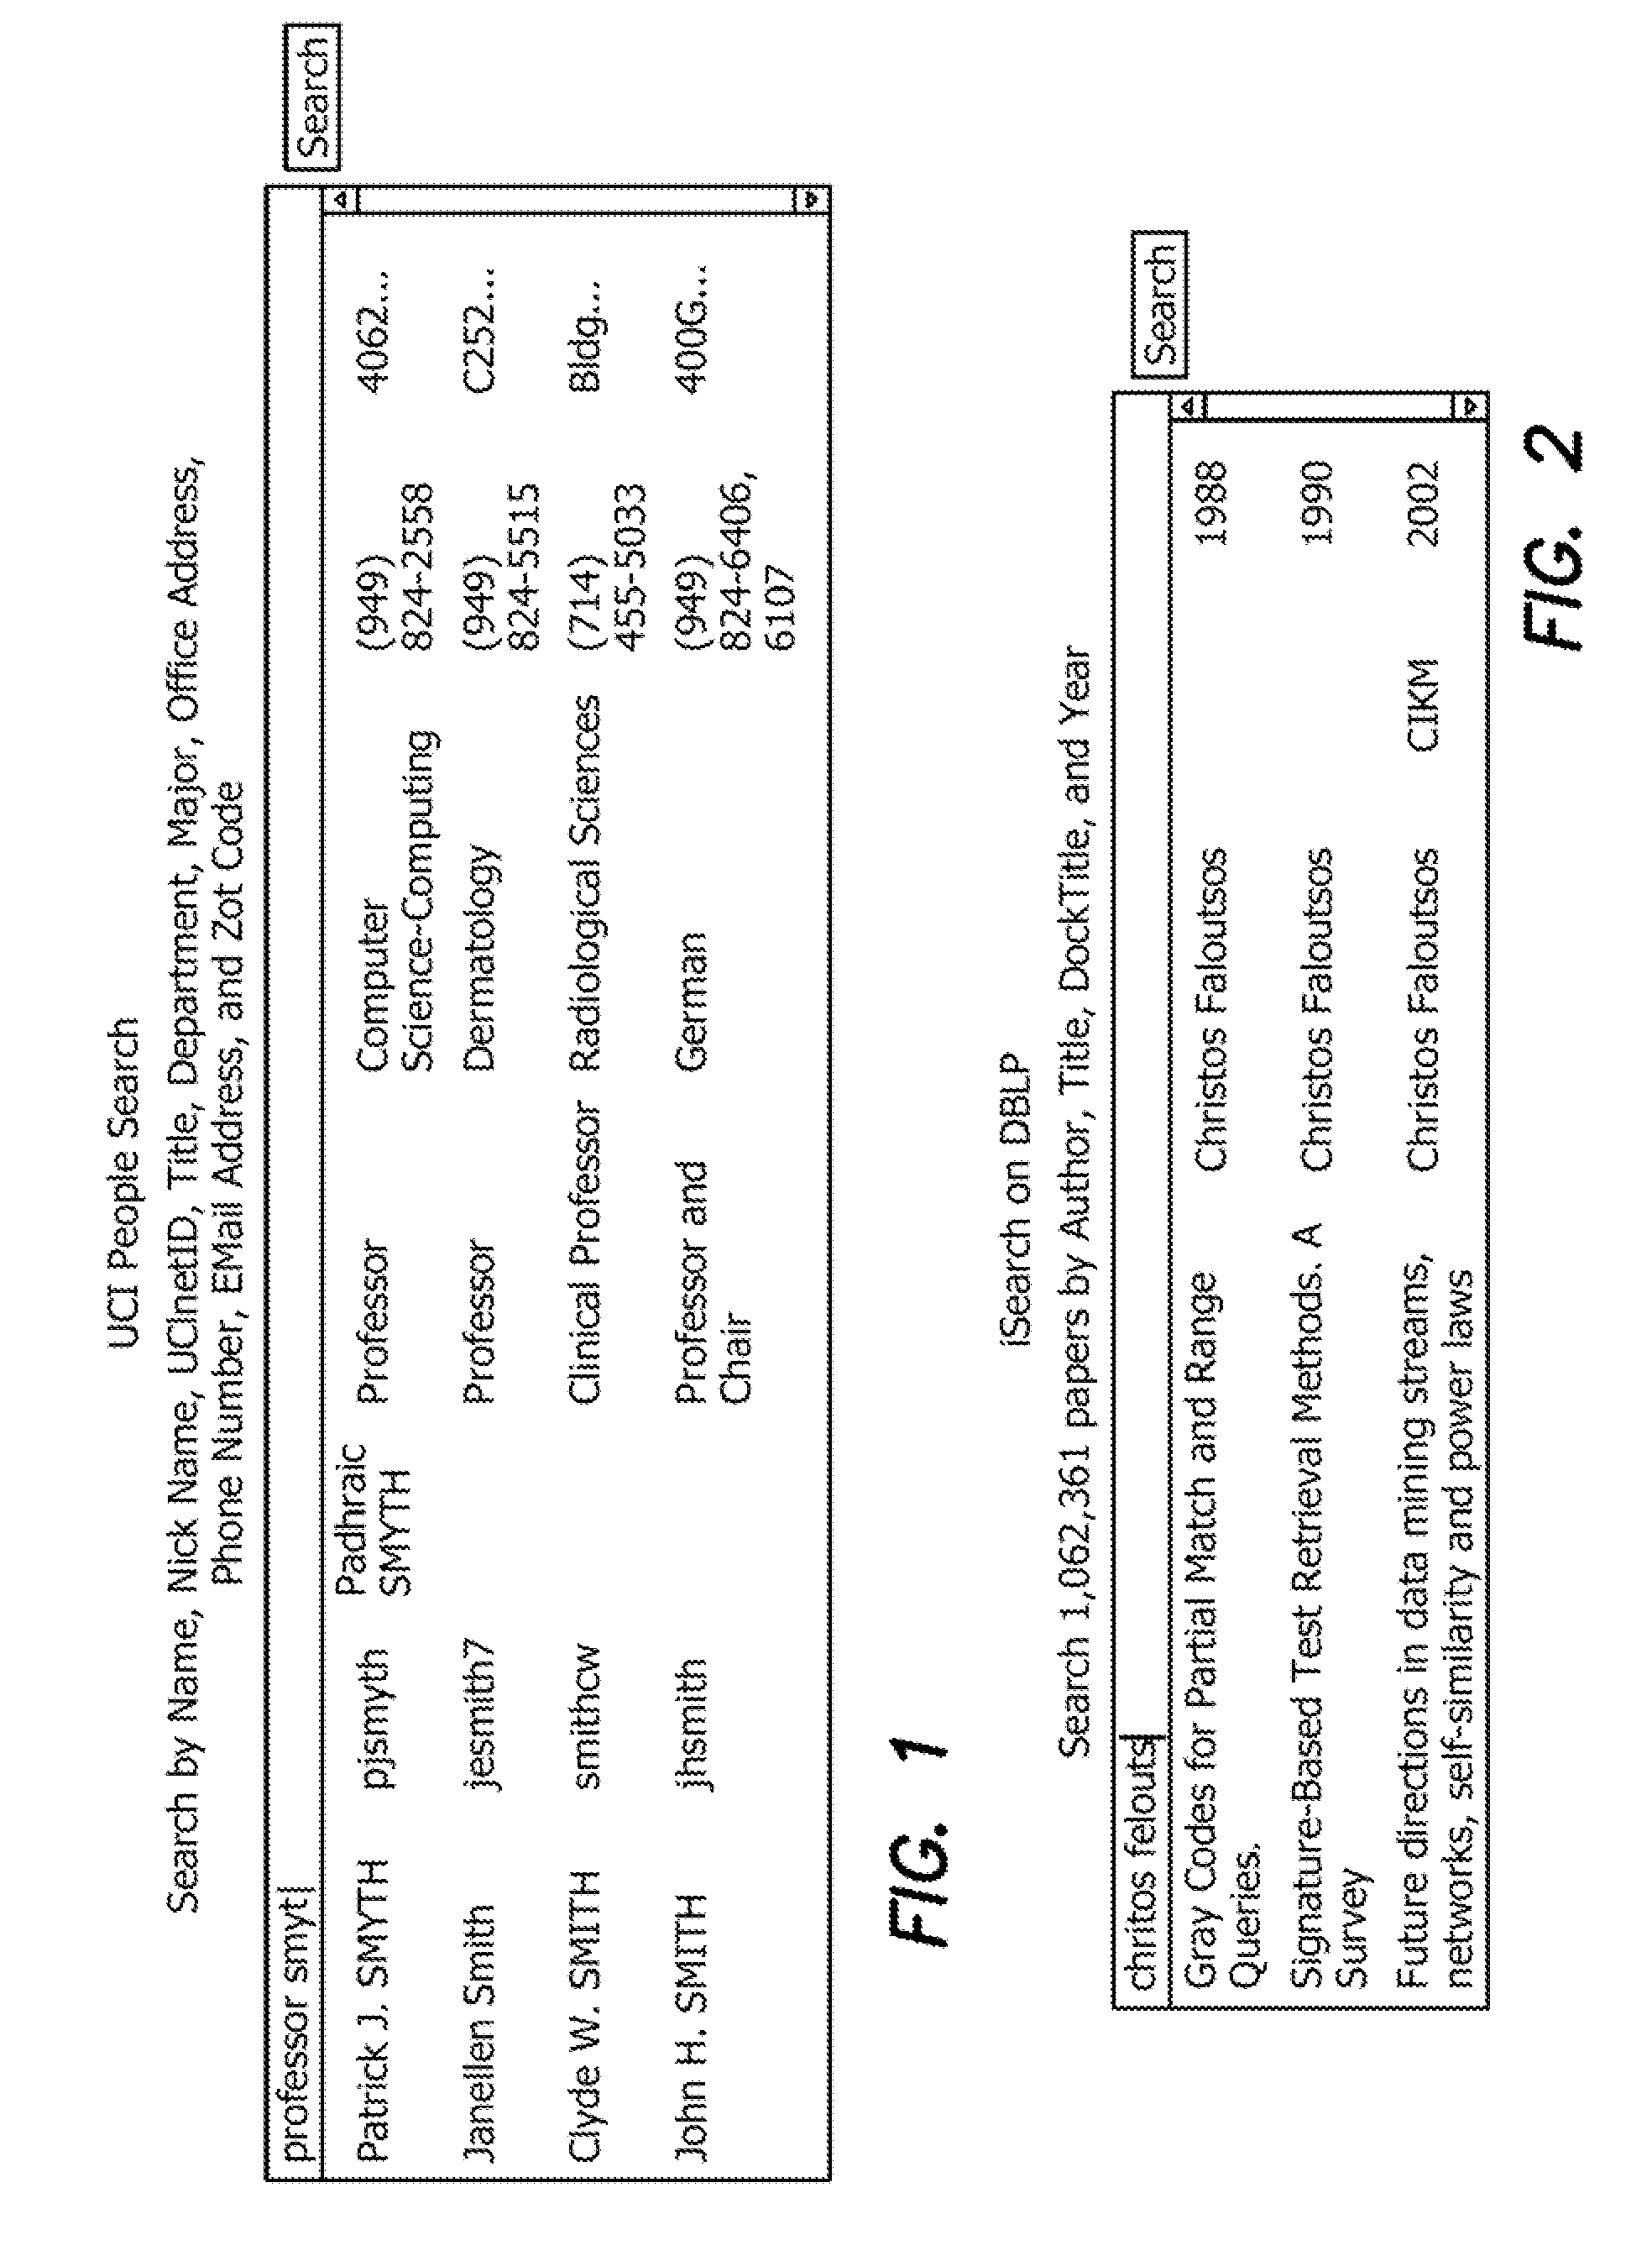 Method for Efficiently Supporting Interactive, Fuzzy Search on Structured Data